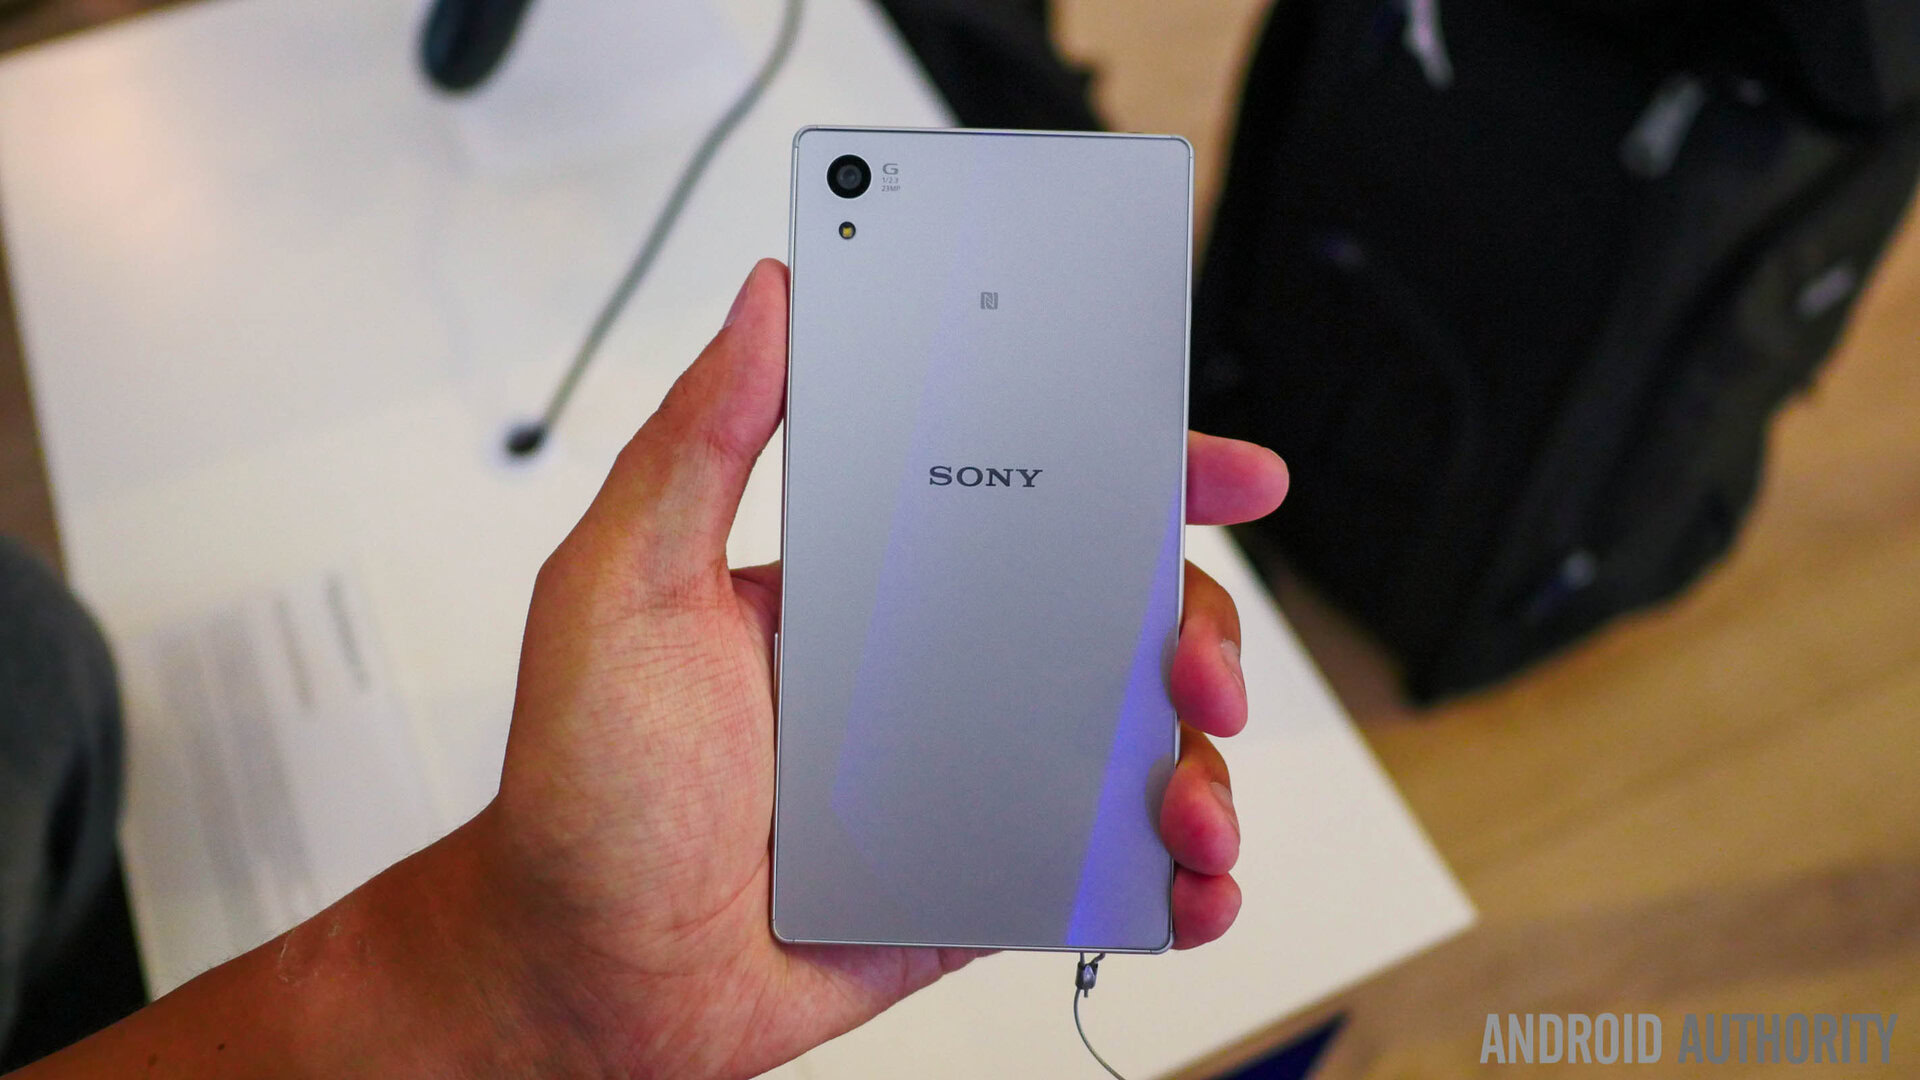 Sony Xperia Z5 hands on first look